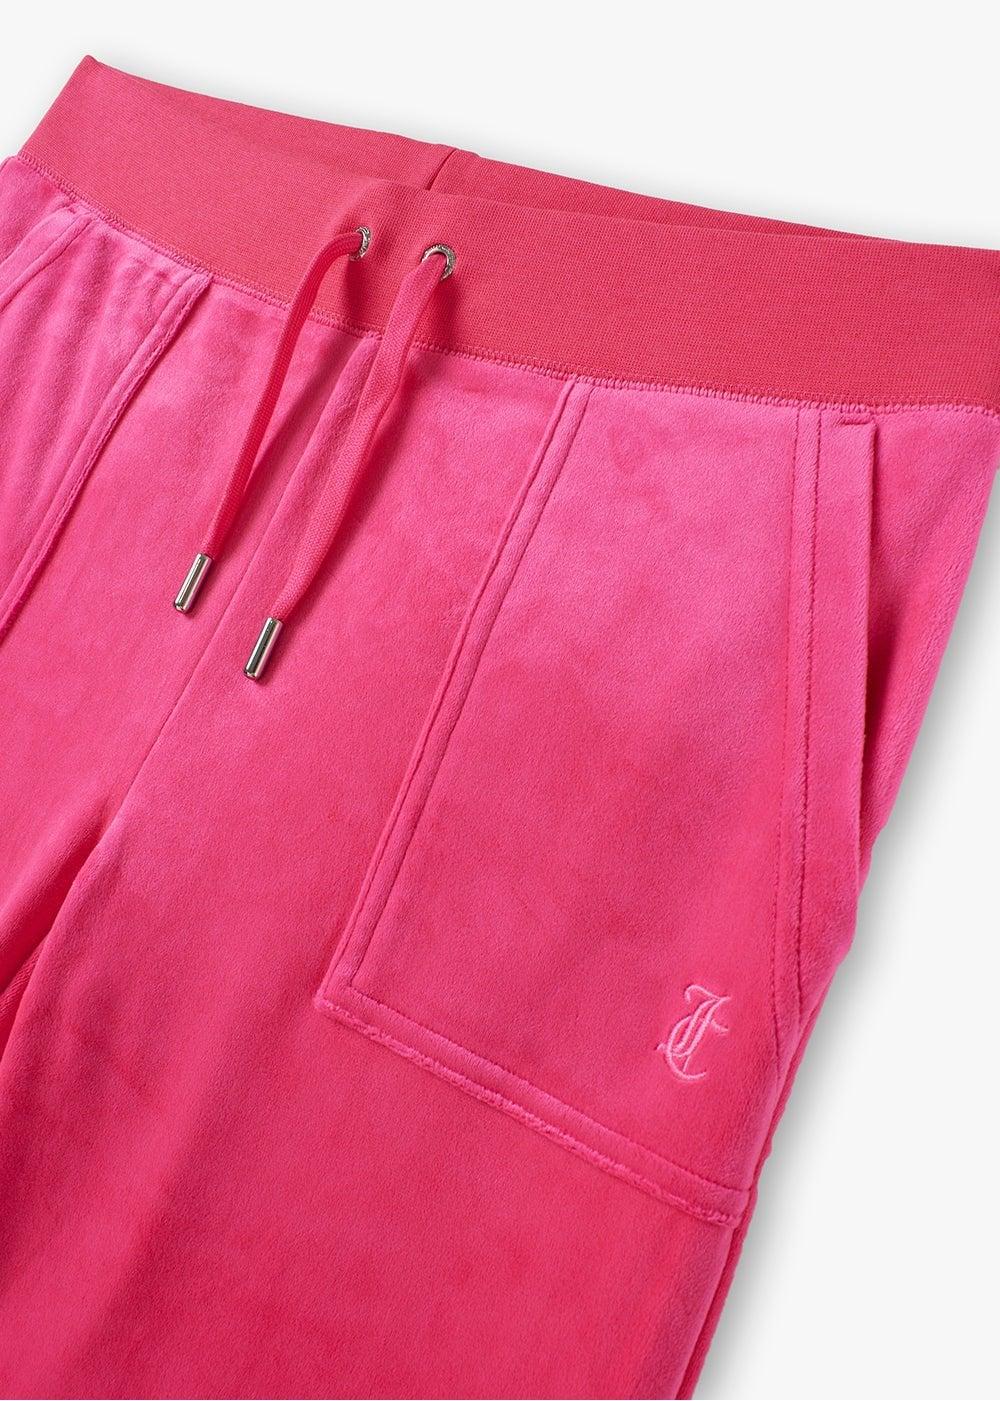 Buy Juicy Couture DEL RAY POCKET PANT - Red